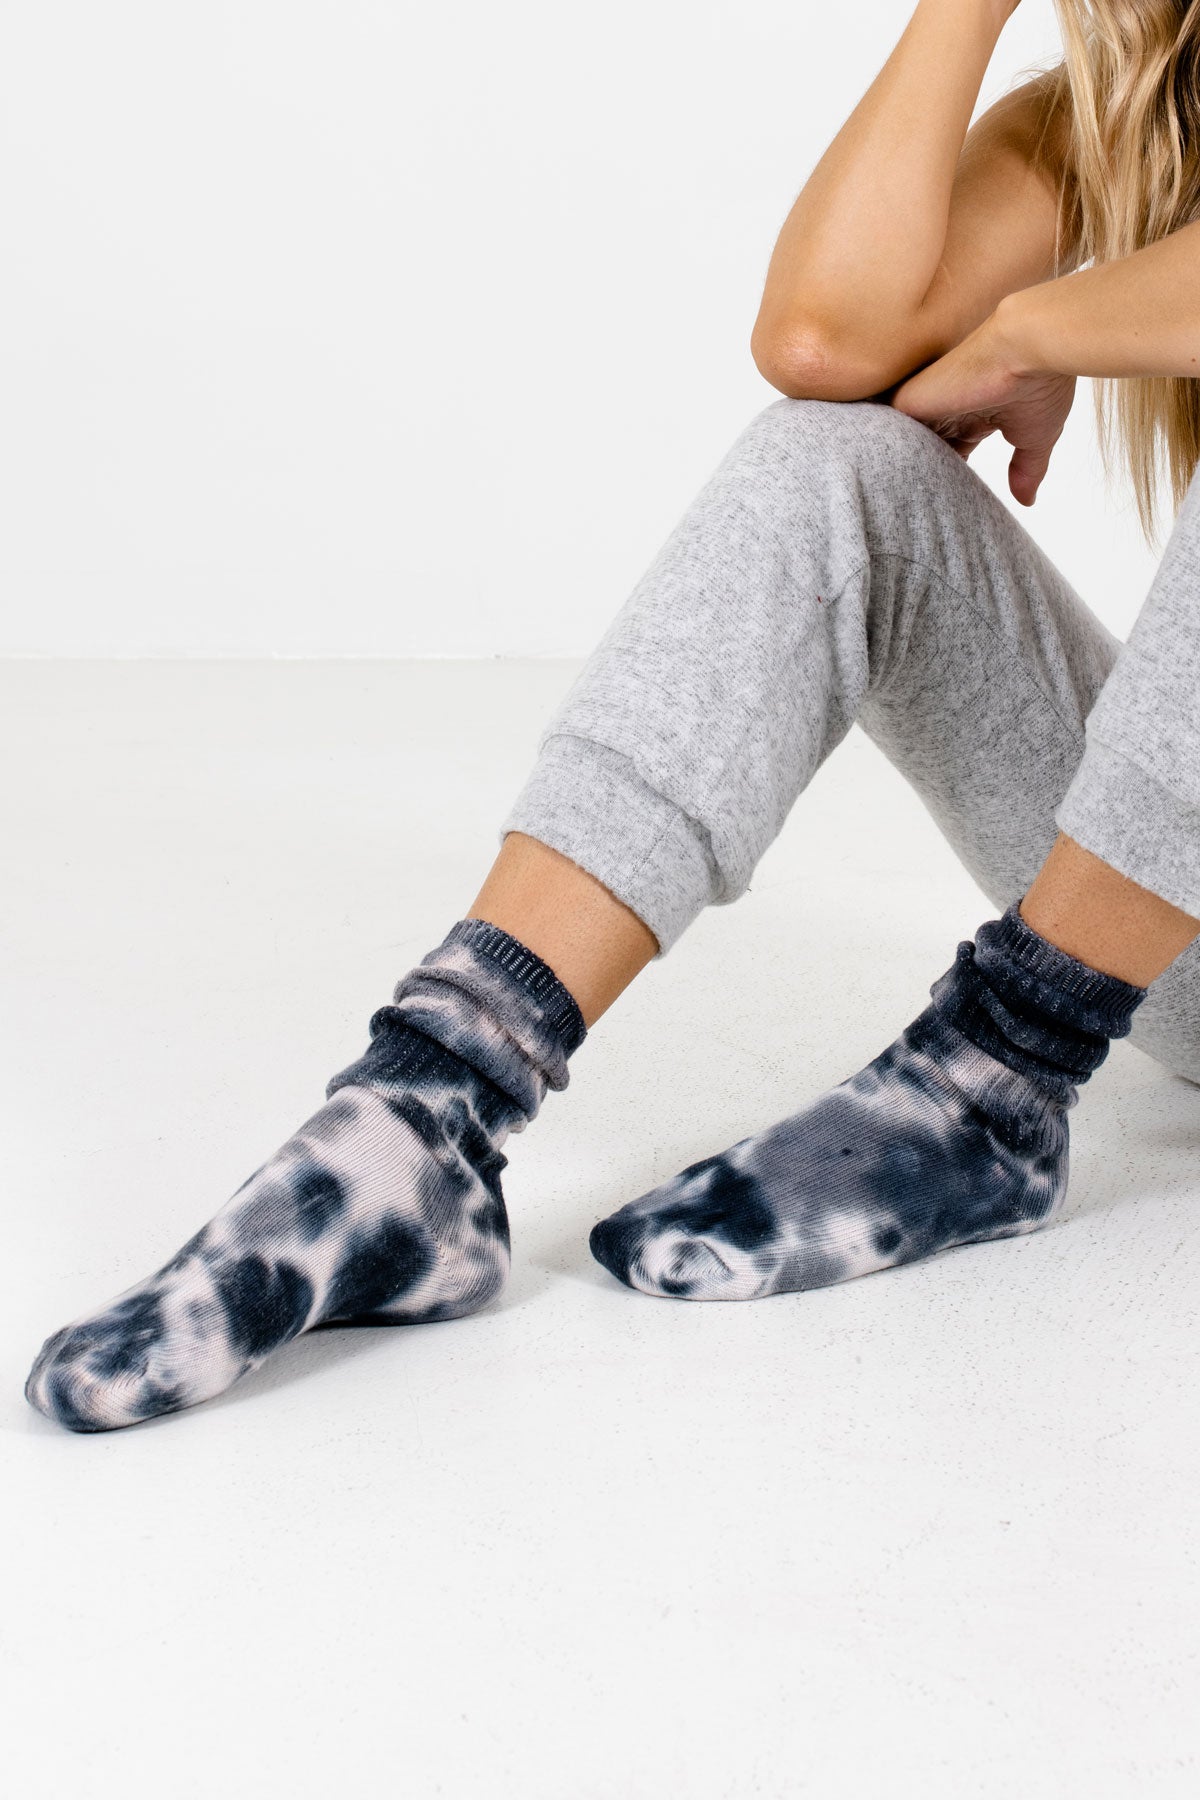 Gray Tie-Dye Cute and Comfortable Boutique Socks for Women